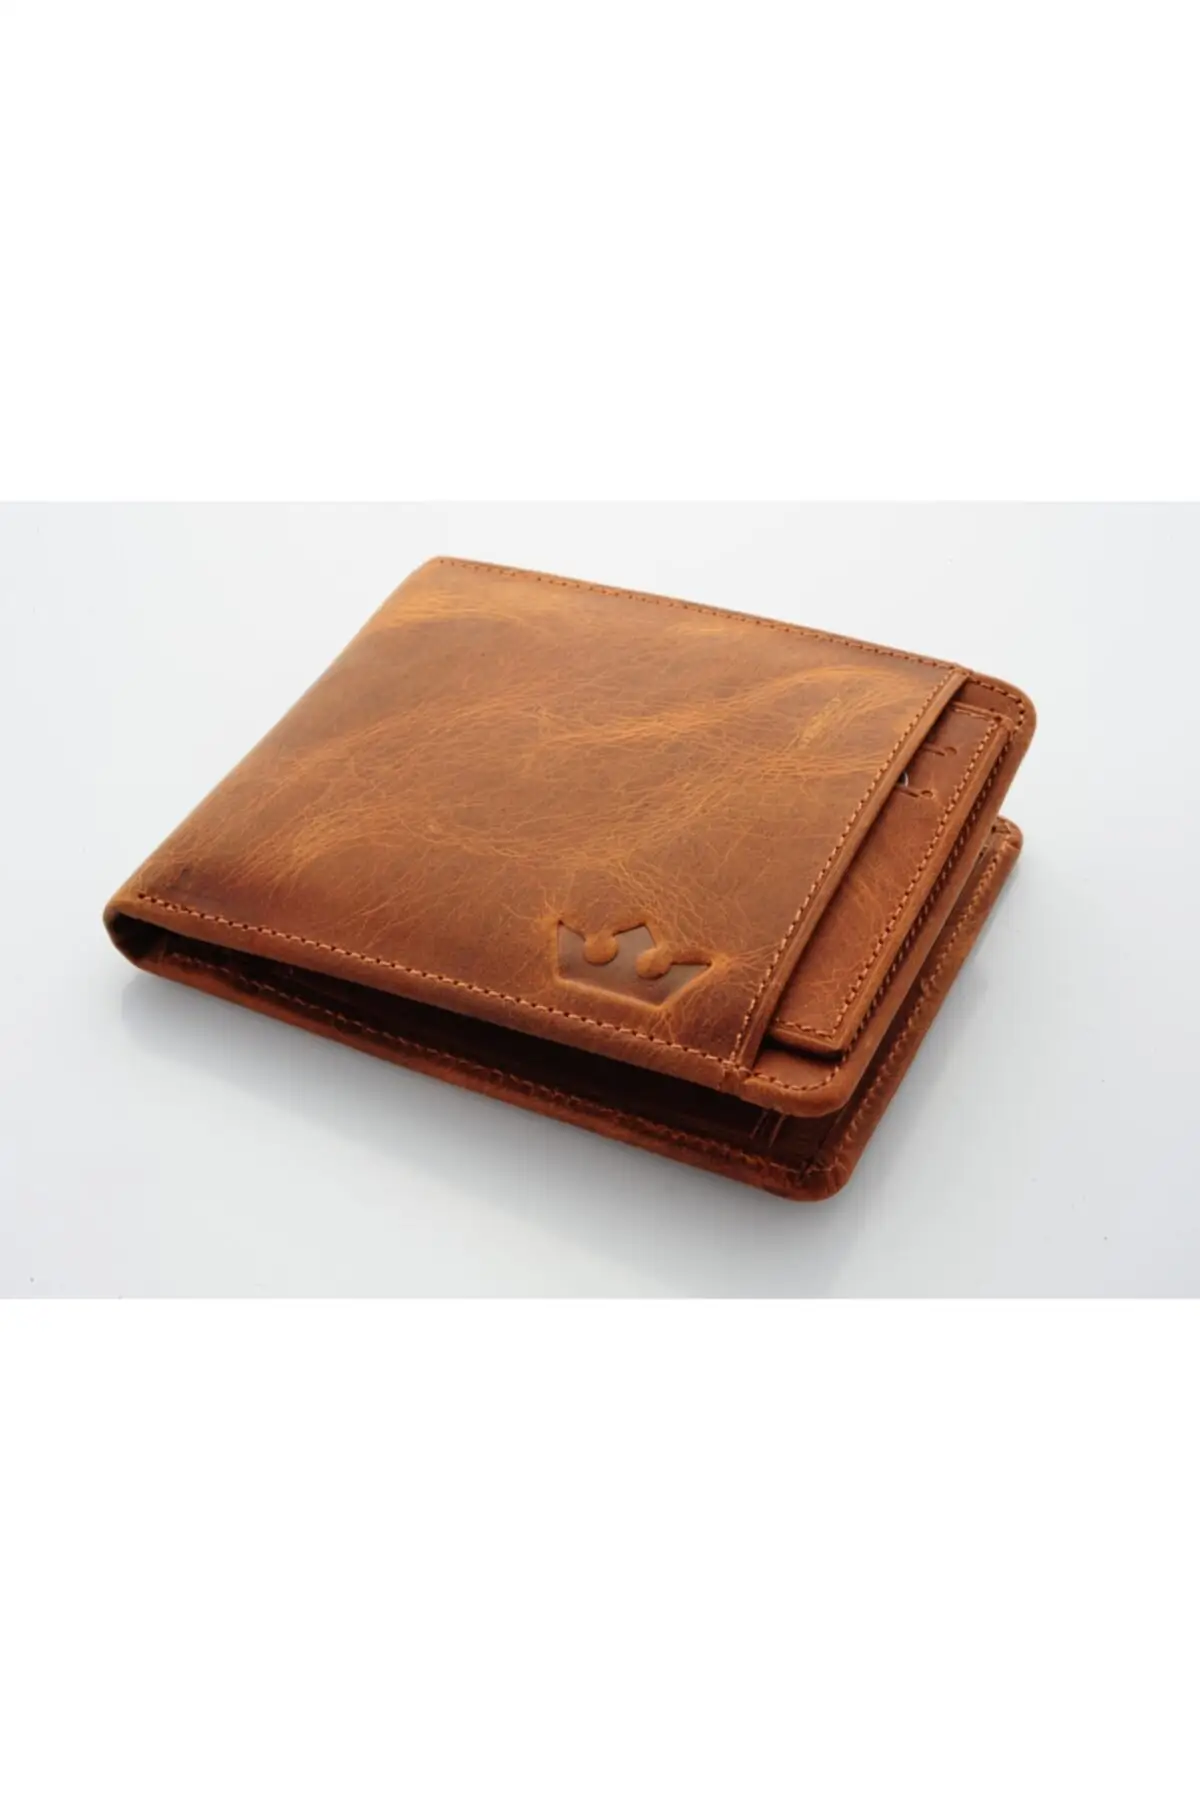 Royal Crazy Tan Genuine Leather Wallet + Card Wallet Real Leather Brown Money And Card Wallet Wallet